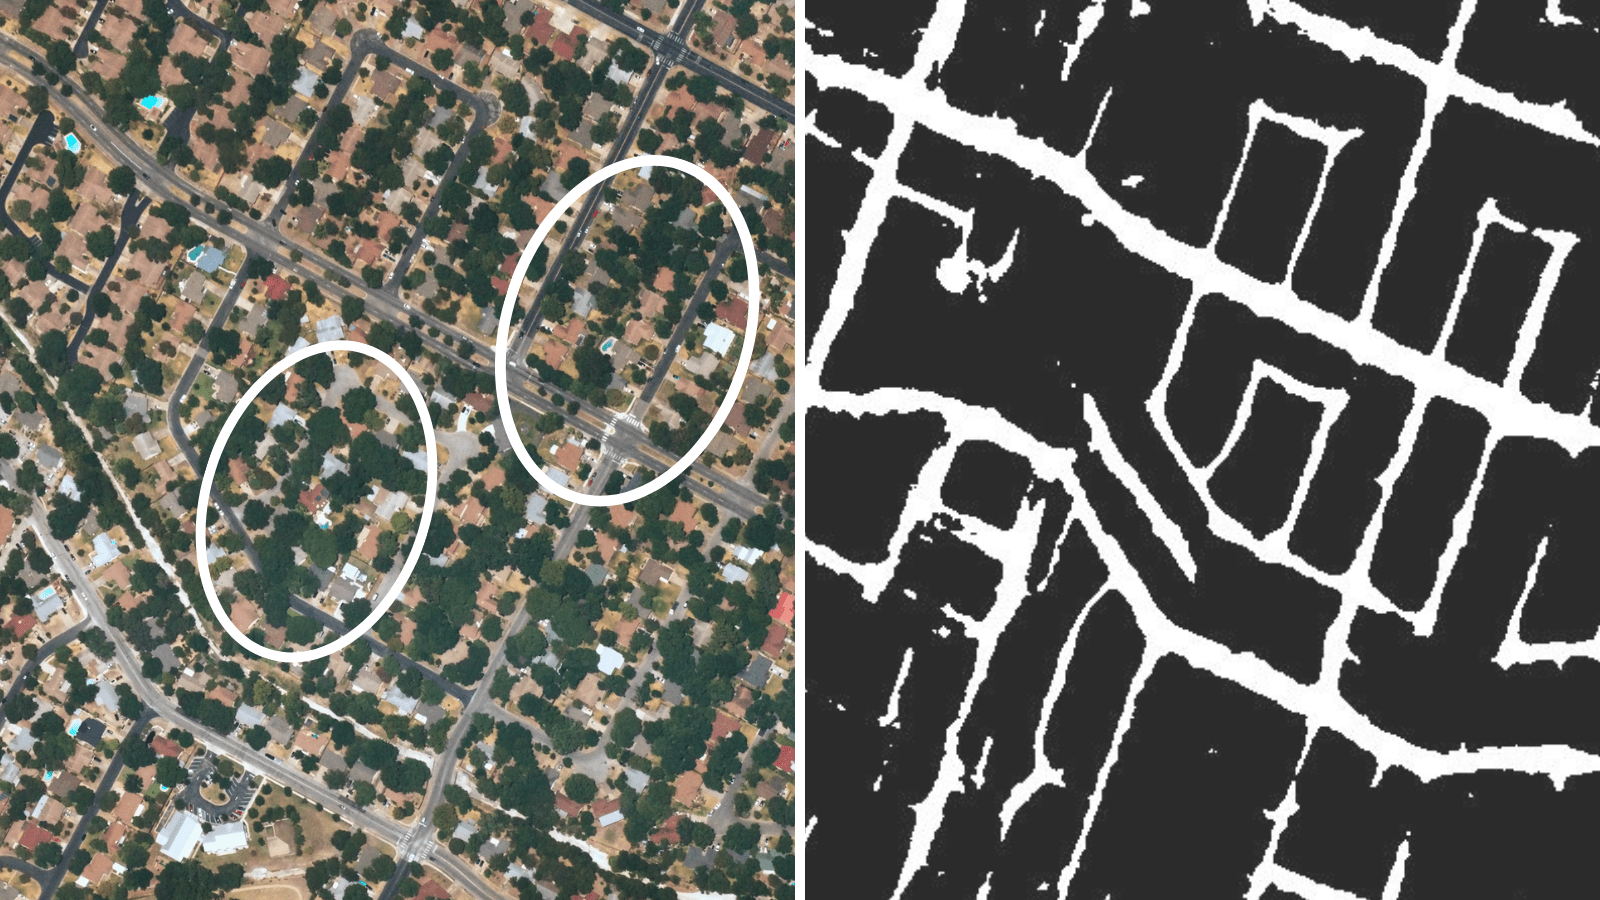 Near Space Labs image on left next to respected binary road mask on the right Maria Alba from “A Novel Approach for Road Detection on Aerial Imagery.”